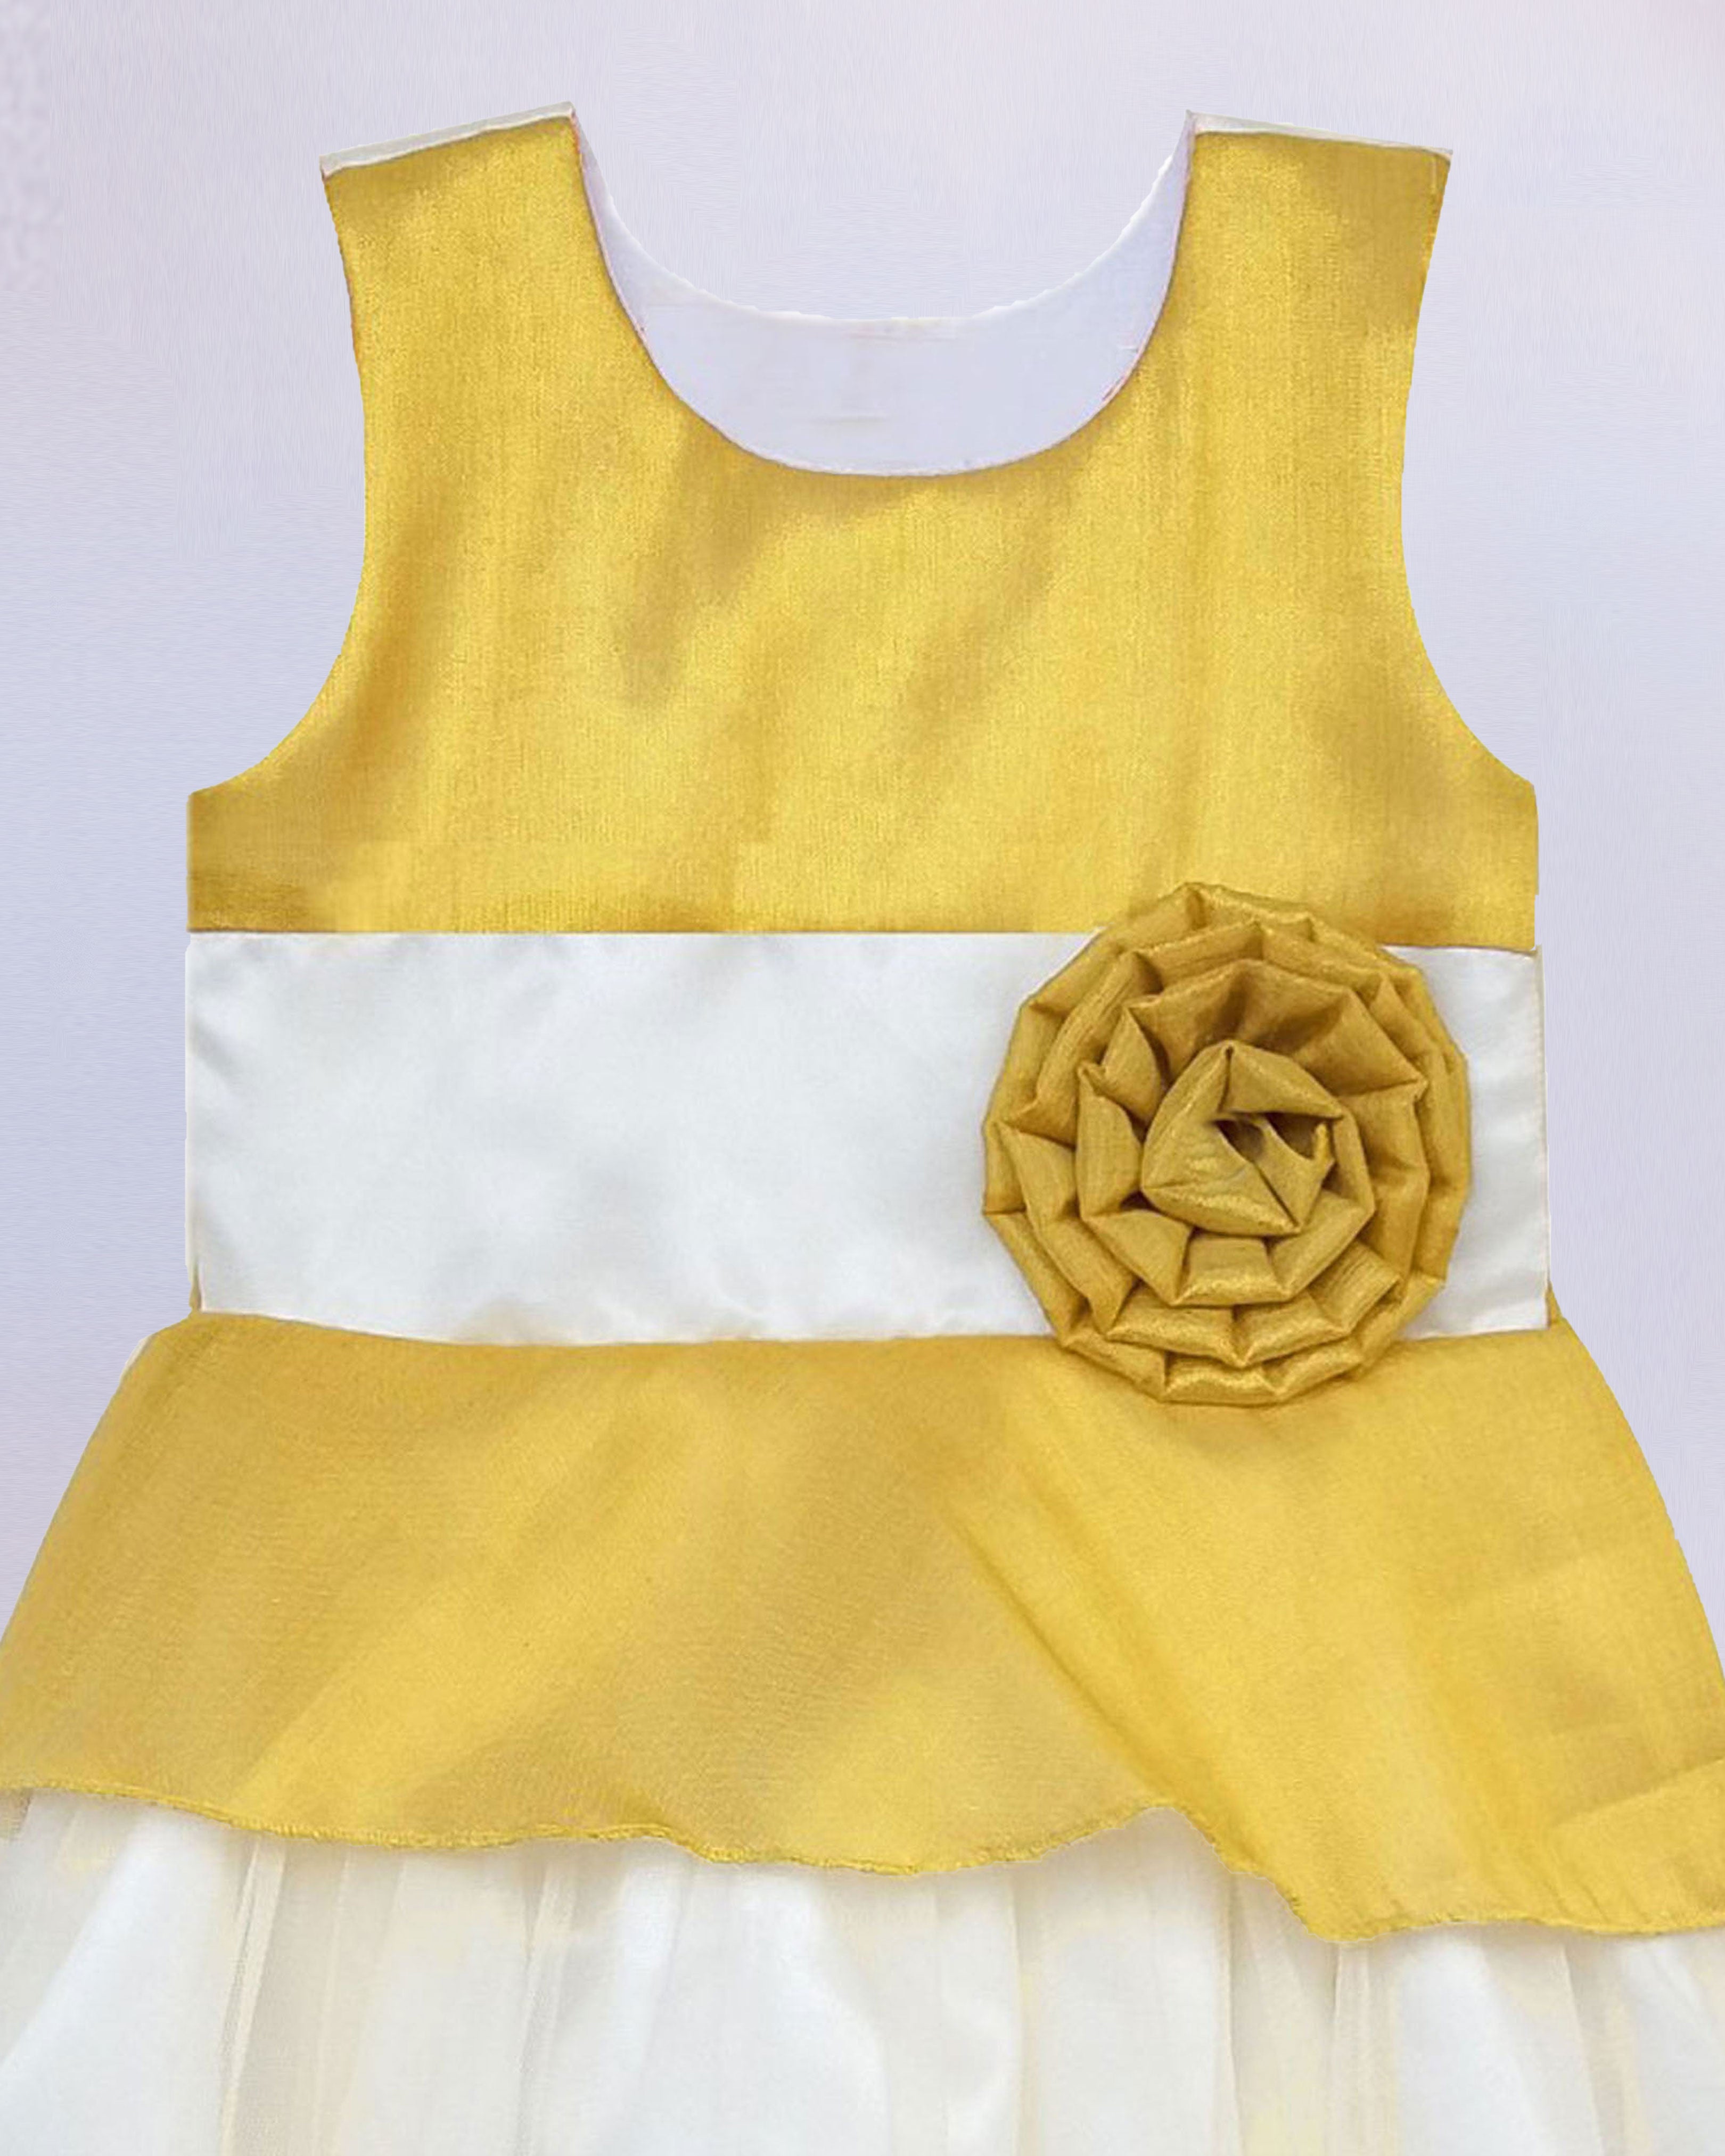 Buy Stanwells Kids Baby Girl's Kerala Kasavu Traditional Handloom Cotton  Silk Frocks for Girls Birthday Gift for Daughter,Cream & Gold| 6-12 Months  at Amazon.in